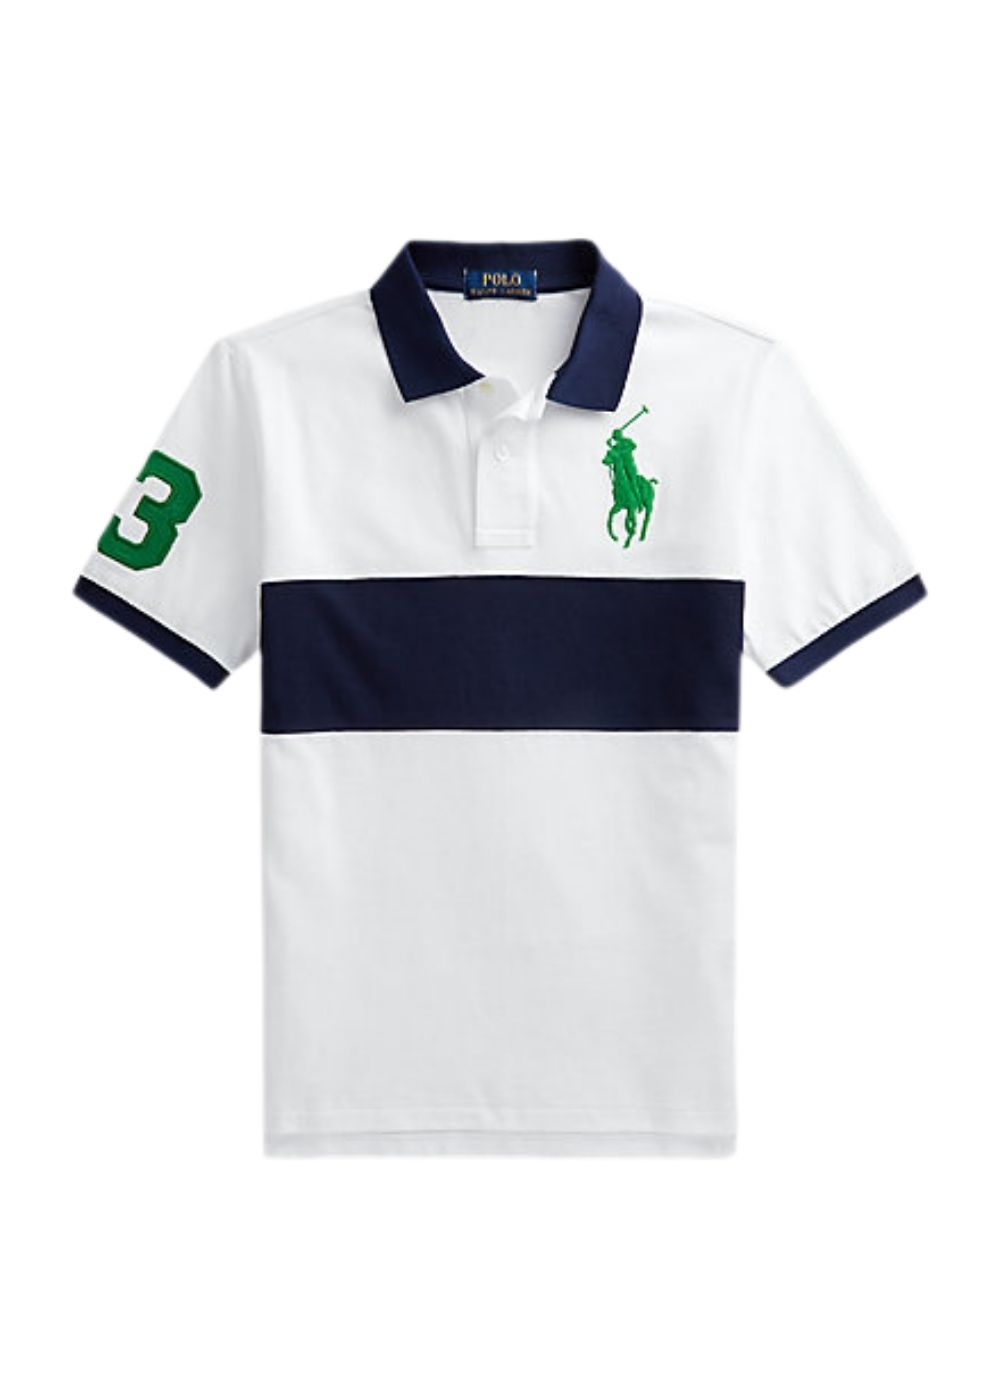 Featured image for “Polo Ralph Lauren Polo Big pony”